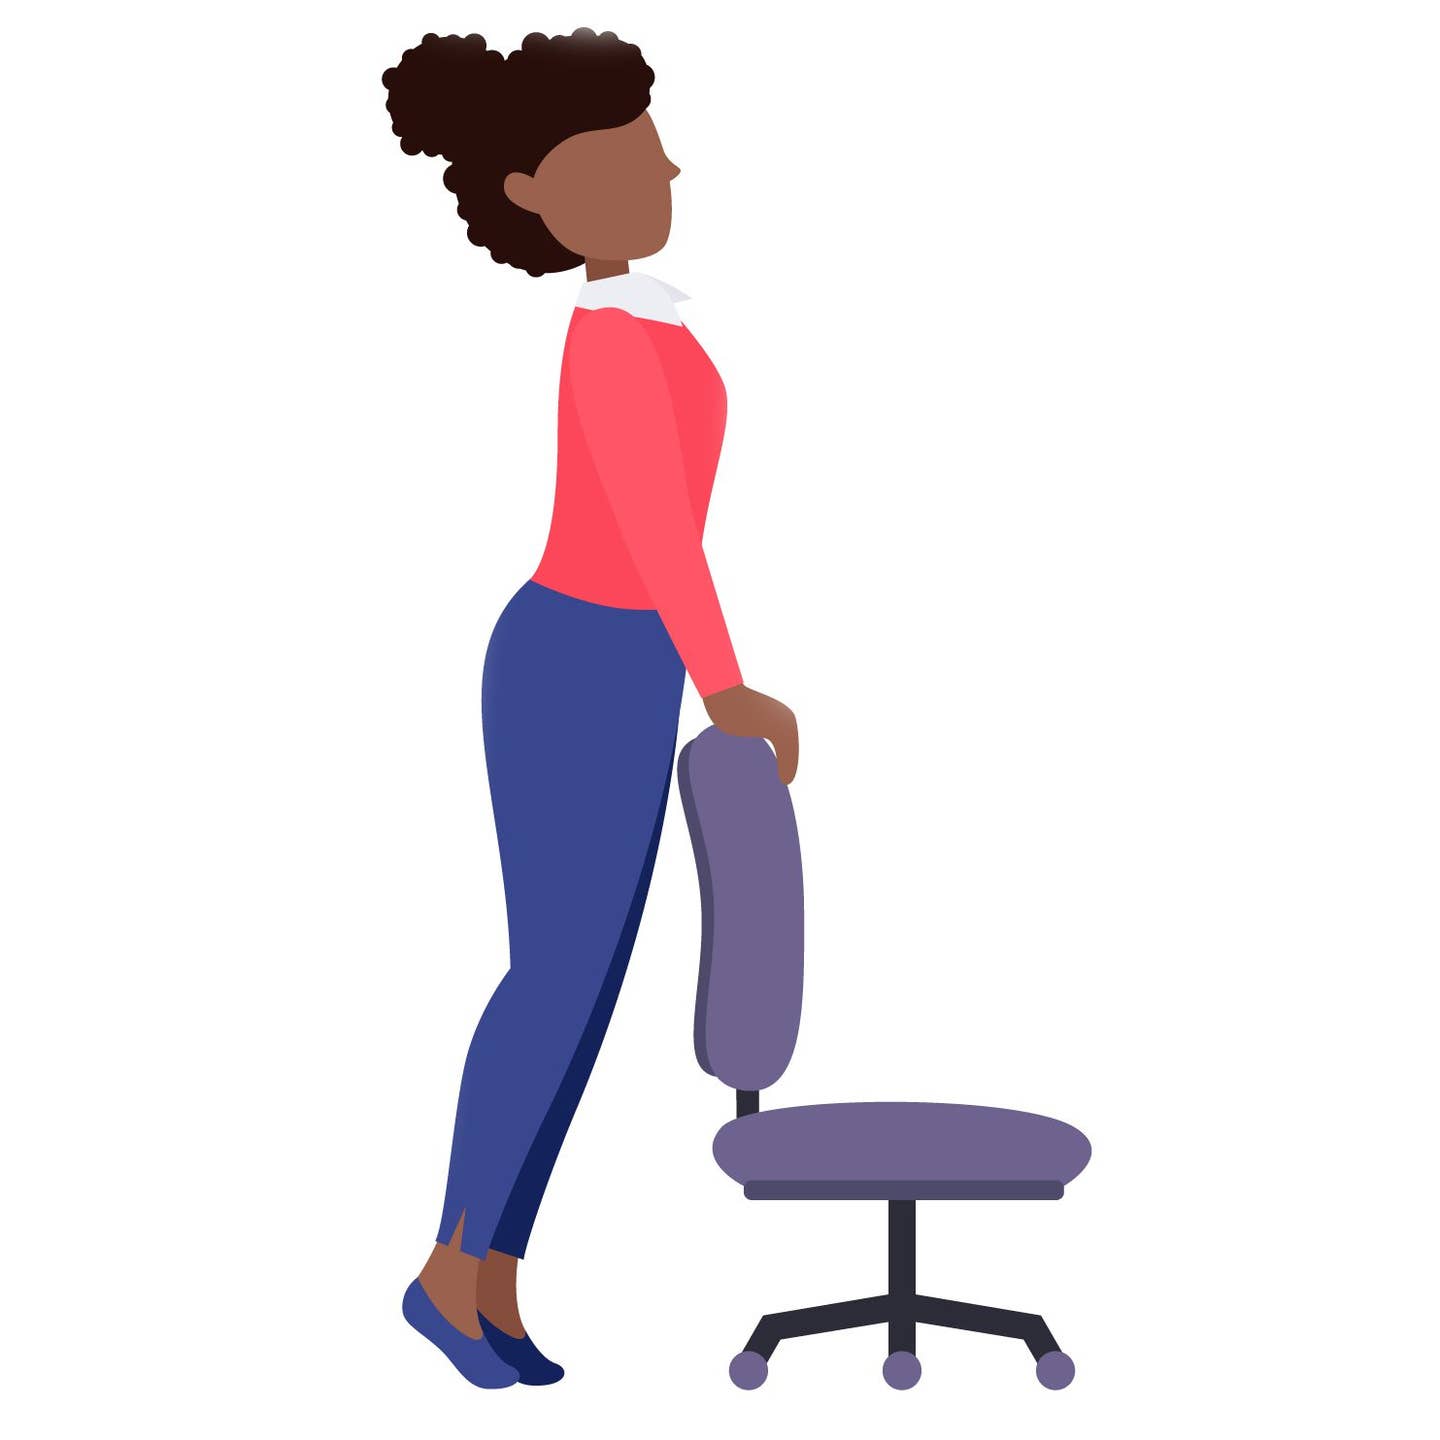 illustration of woman standing behind a chair doing a calf raise exercise